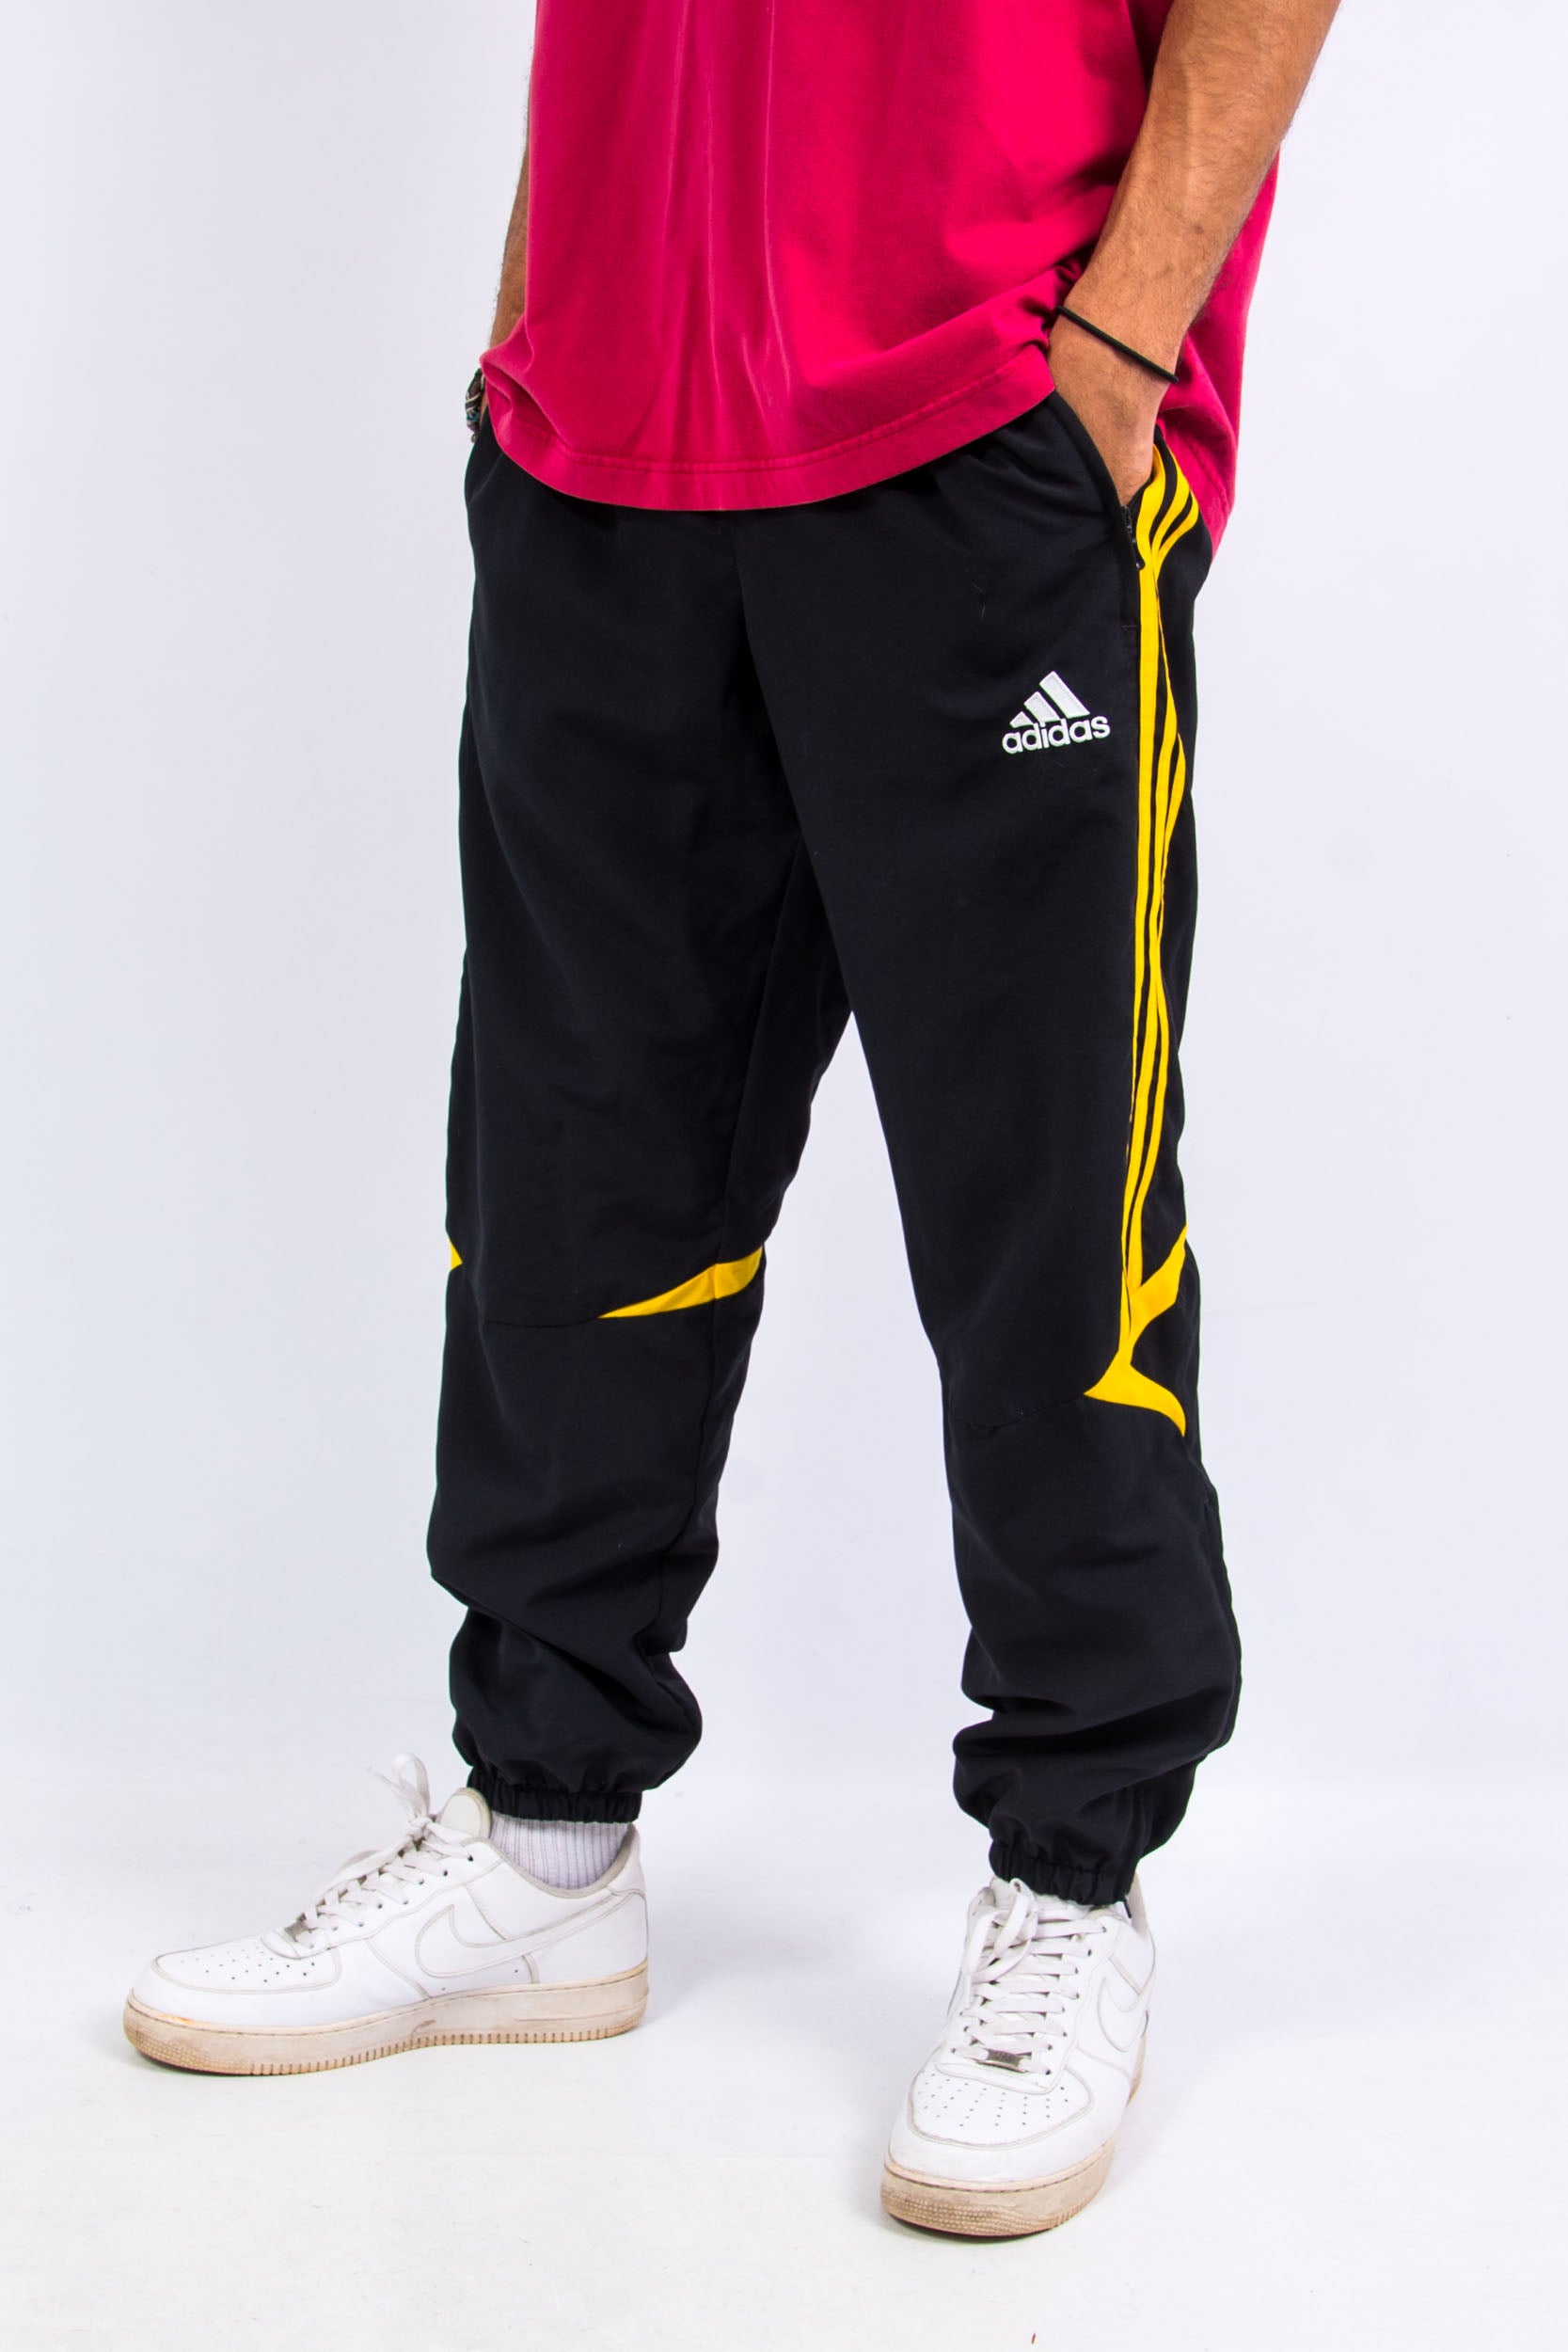 00's Adidas Tracksuit Bottoms – The Vintage Scene